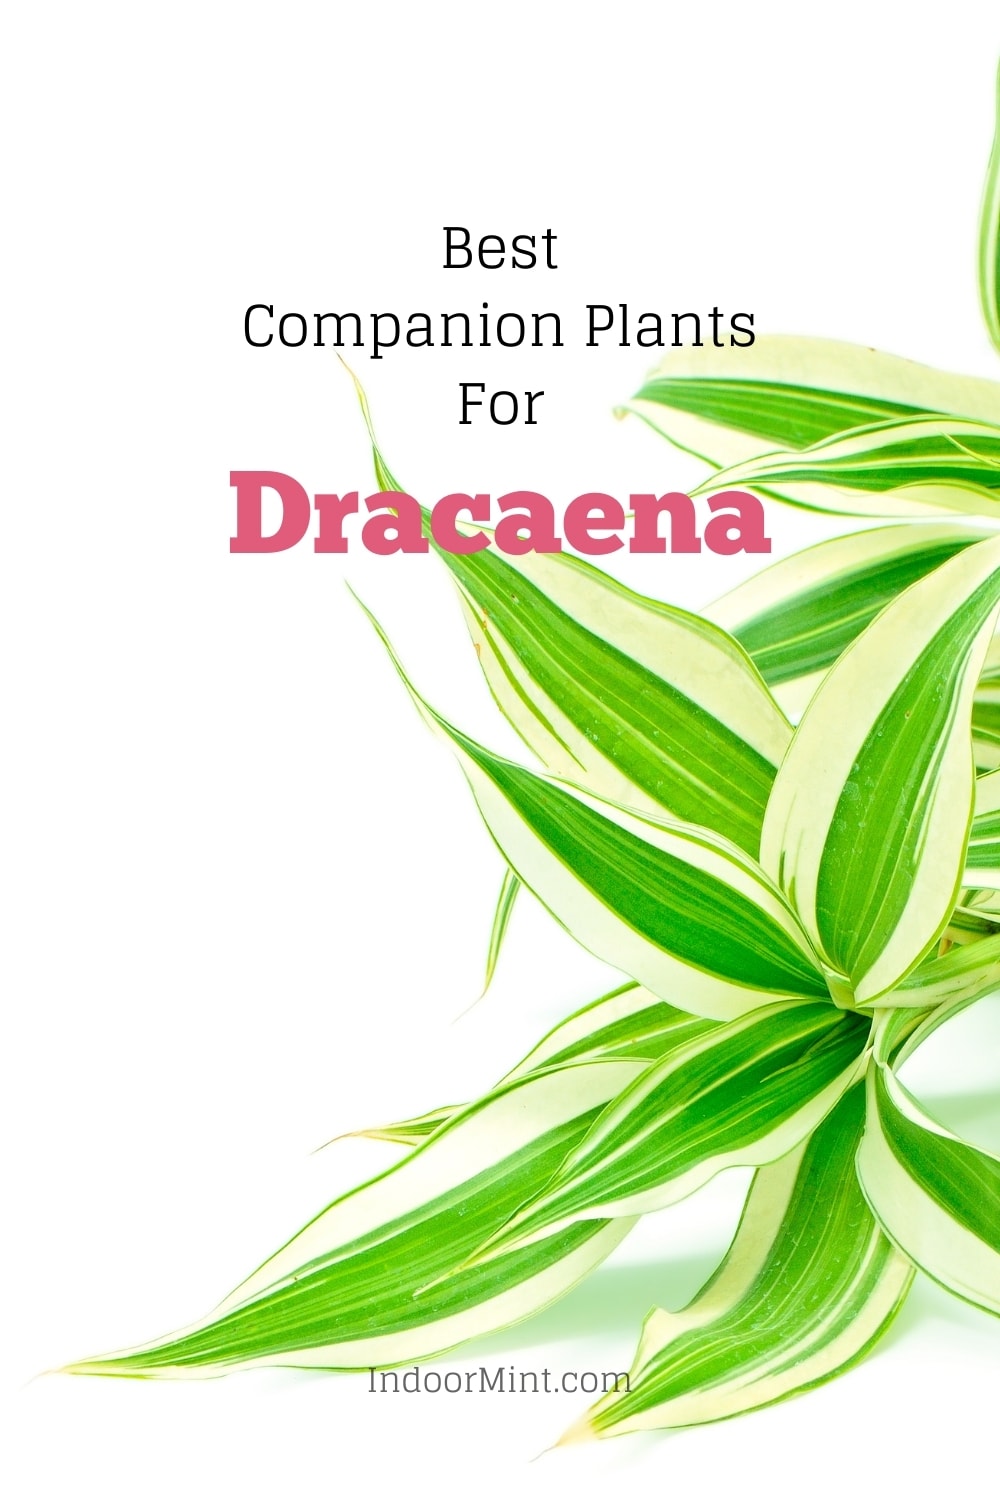 best companion plants for dracaena guide cover image